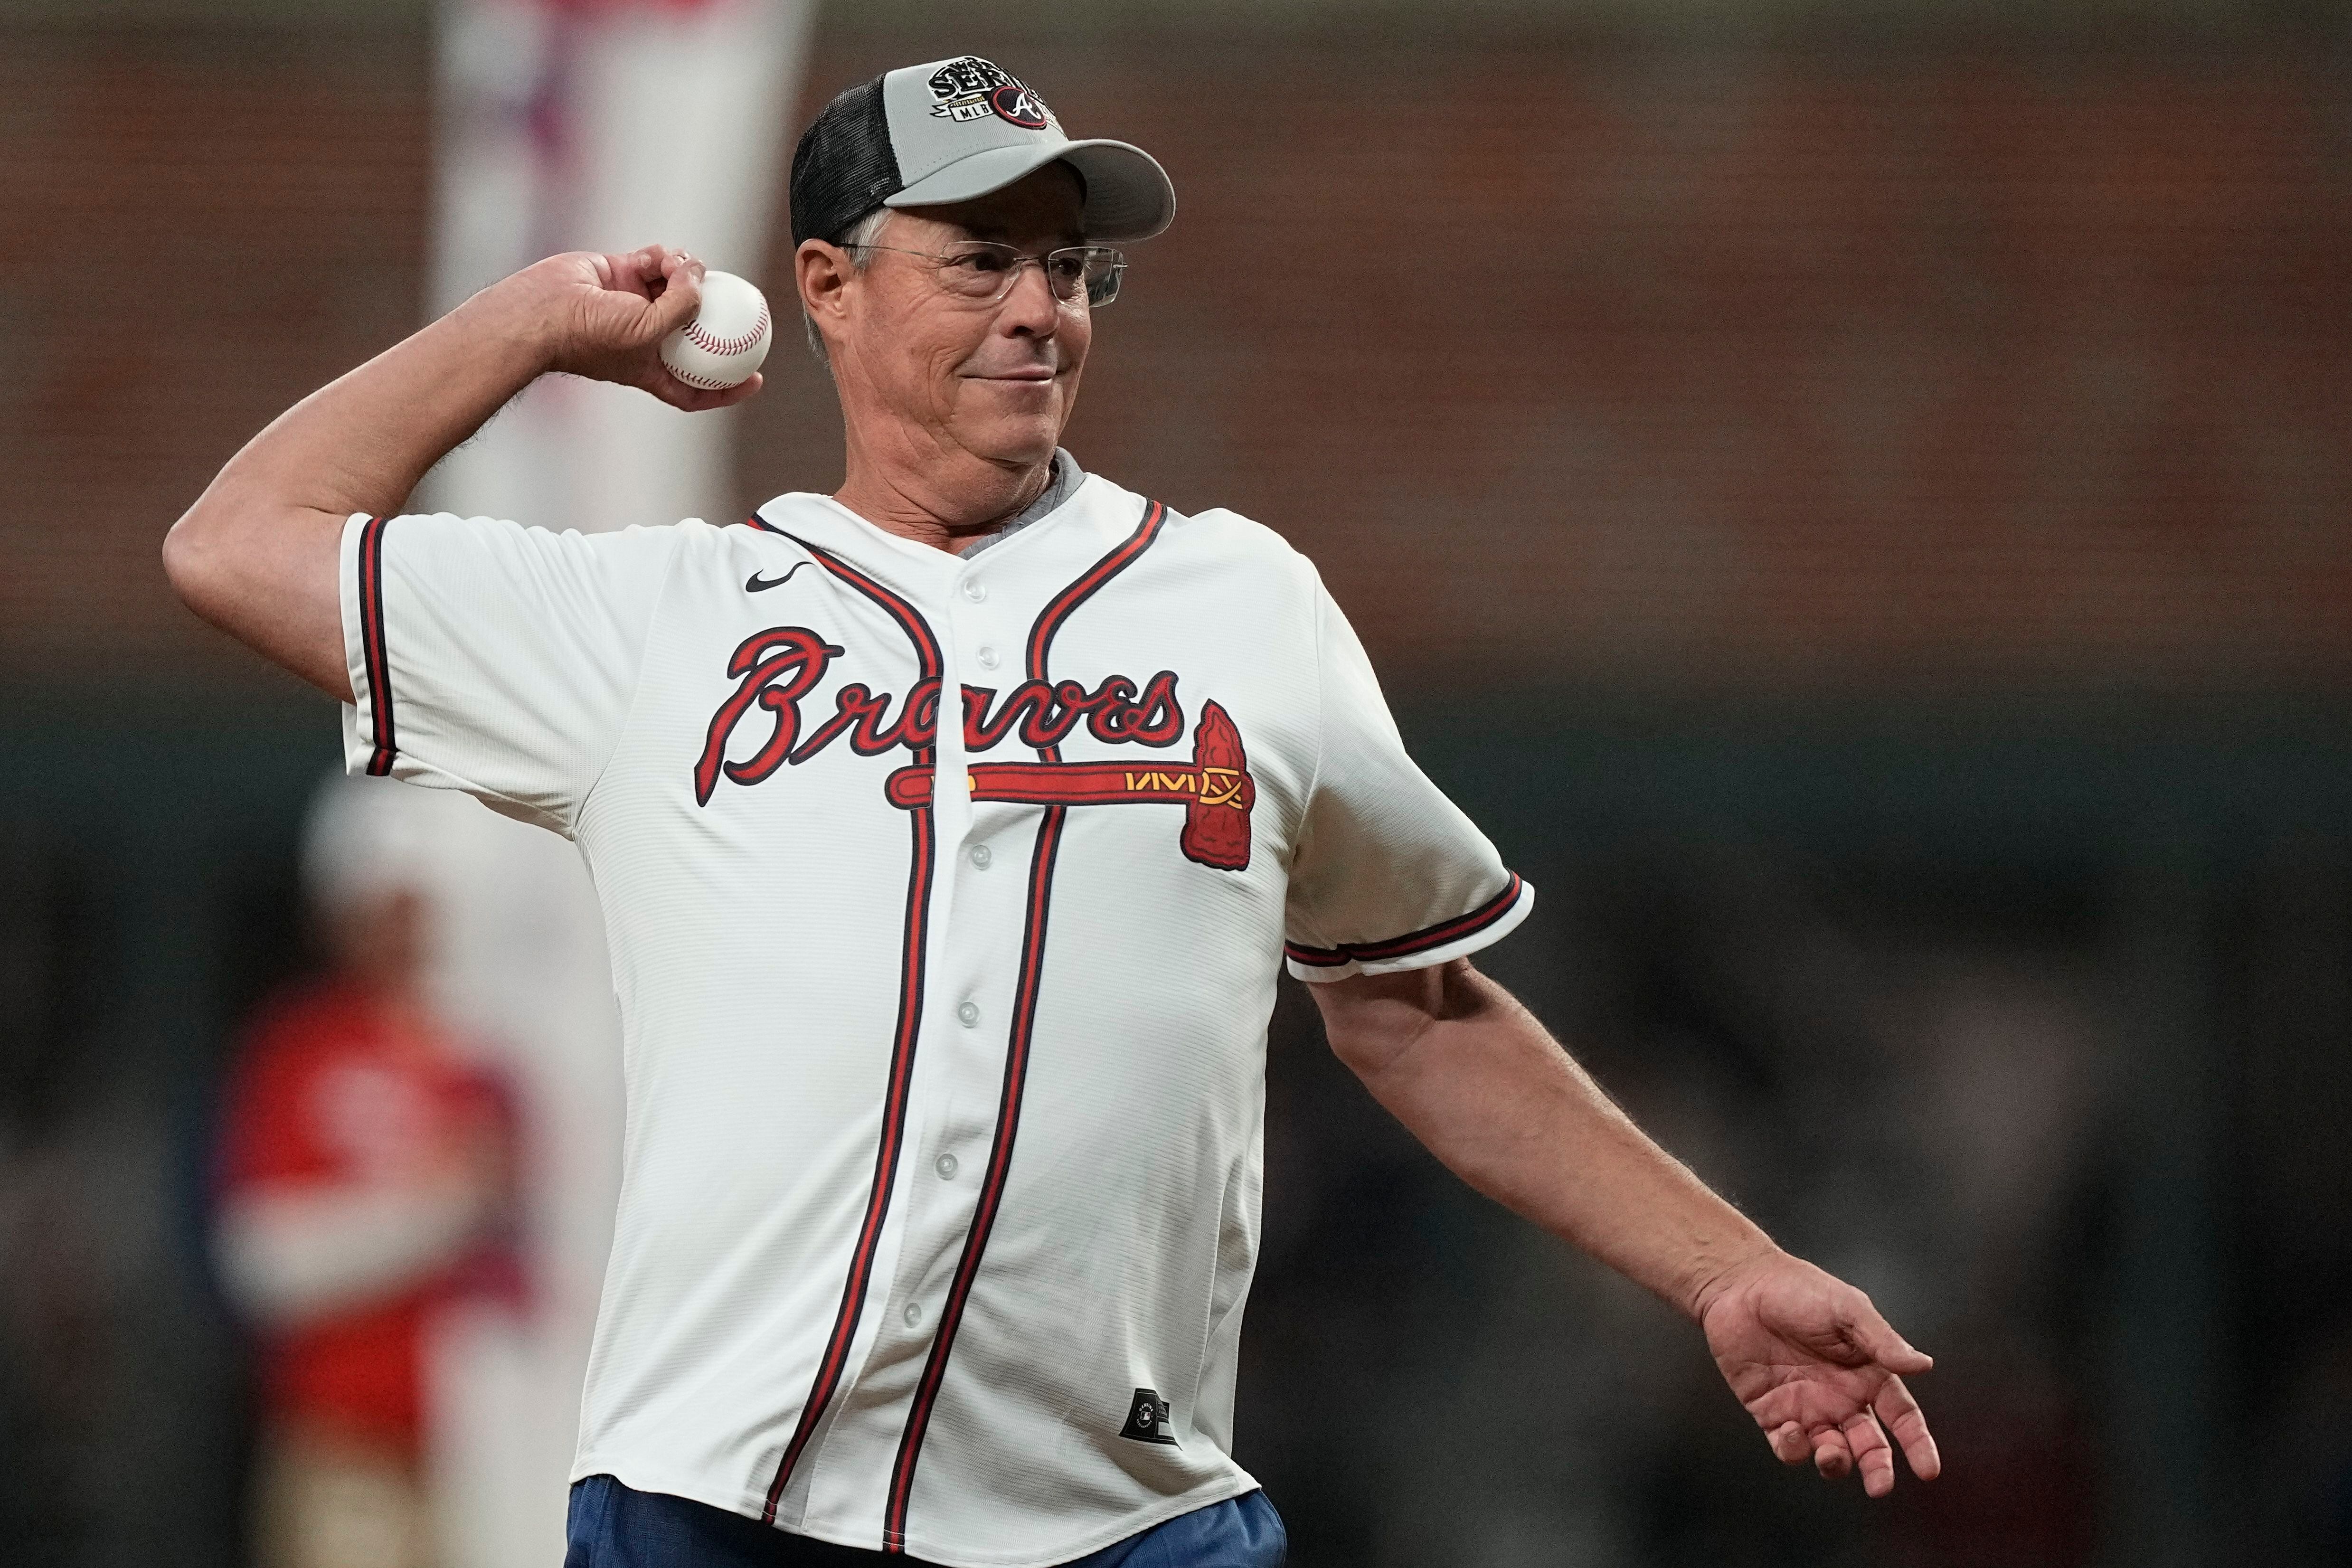 Former Atlanta Braves pitcher Greg Maddux reacts as his jersey is retired  before the Braves game against the New York Mets at Turner Field in  Atlanta, Georgia, Friday, July 17, 2009. (Photo